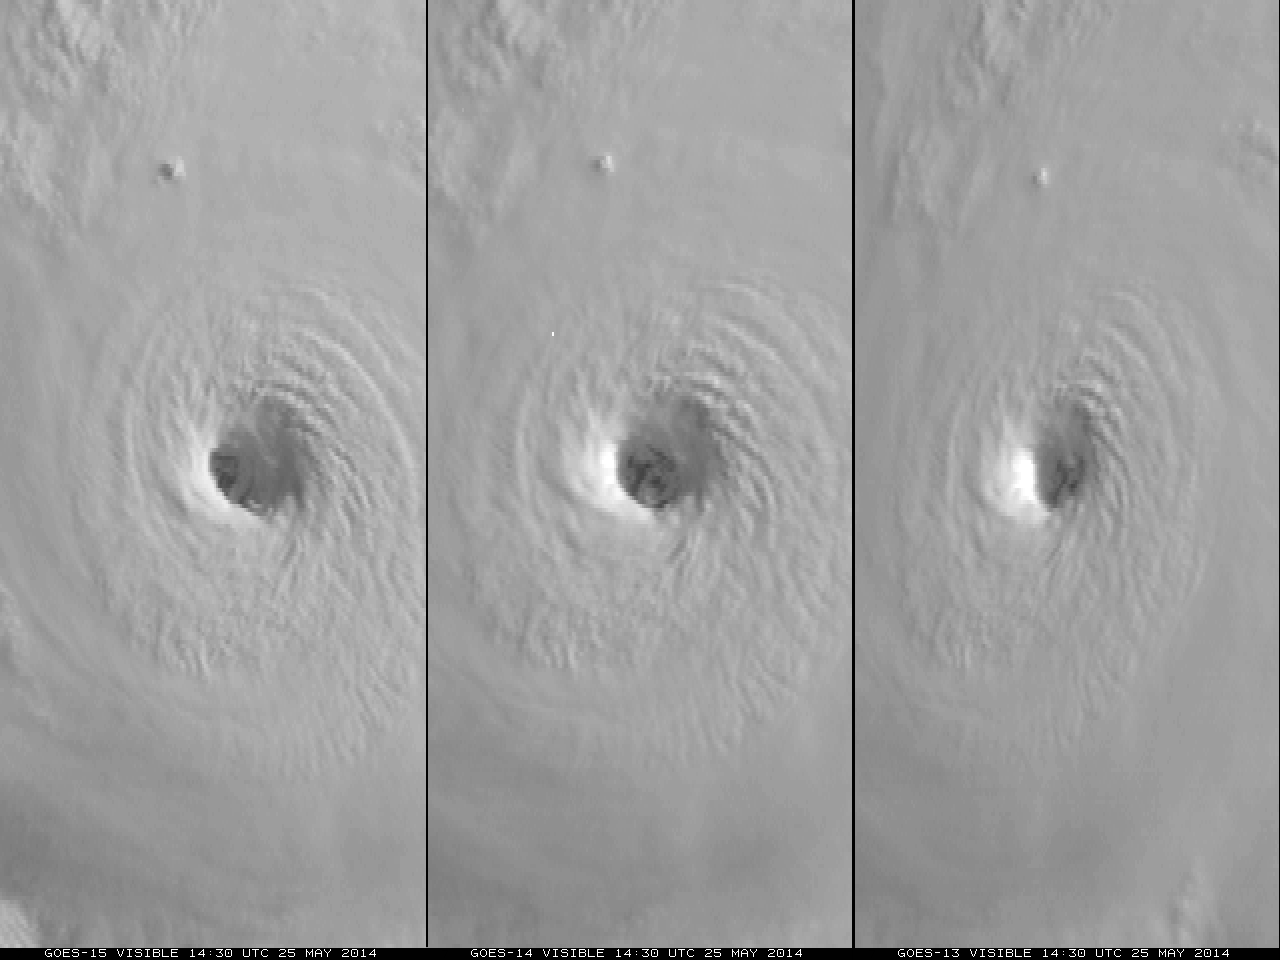 GOES-15 (left), GOES-14 (center), and GOES-13 (right) 0.63 µm visible channel images [click to play animation]